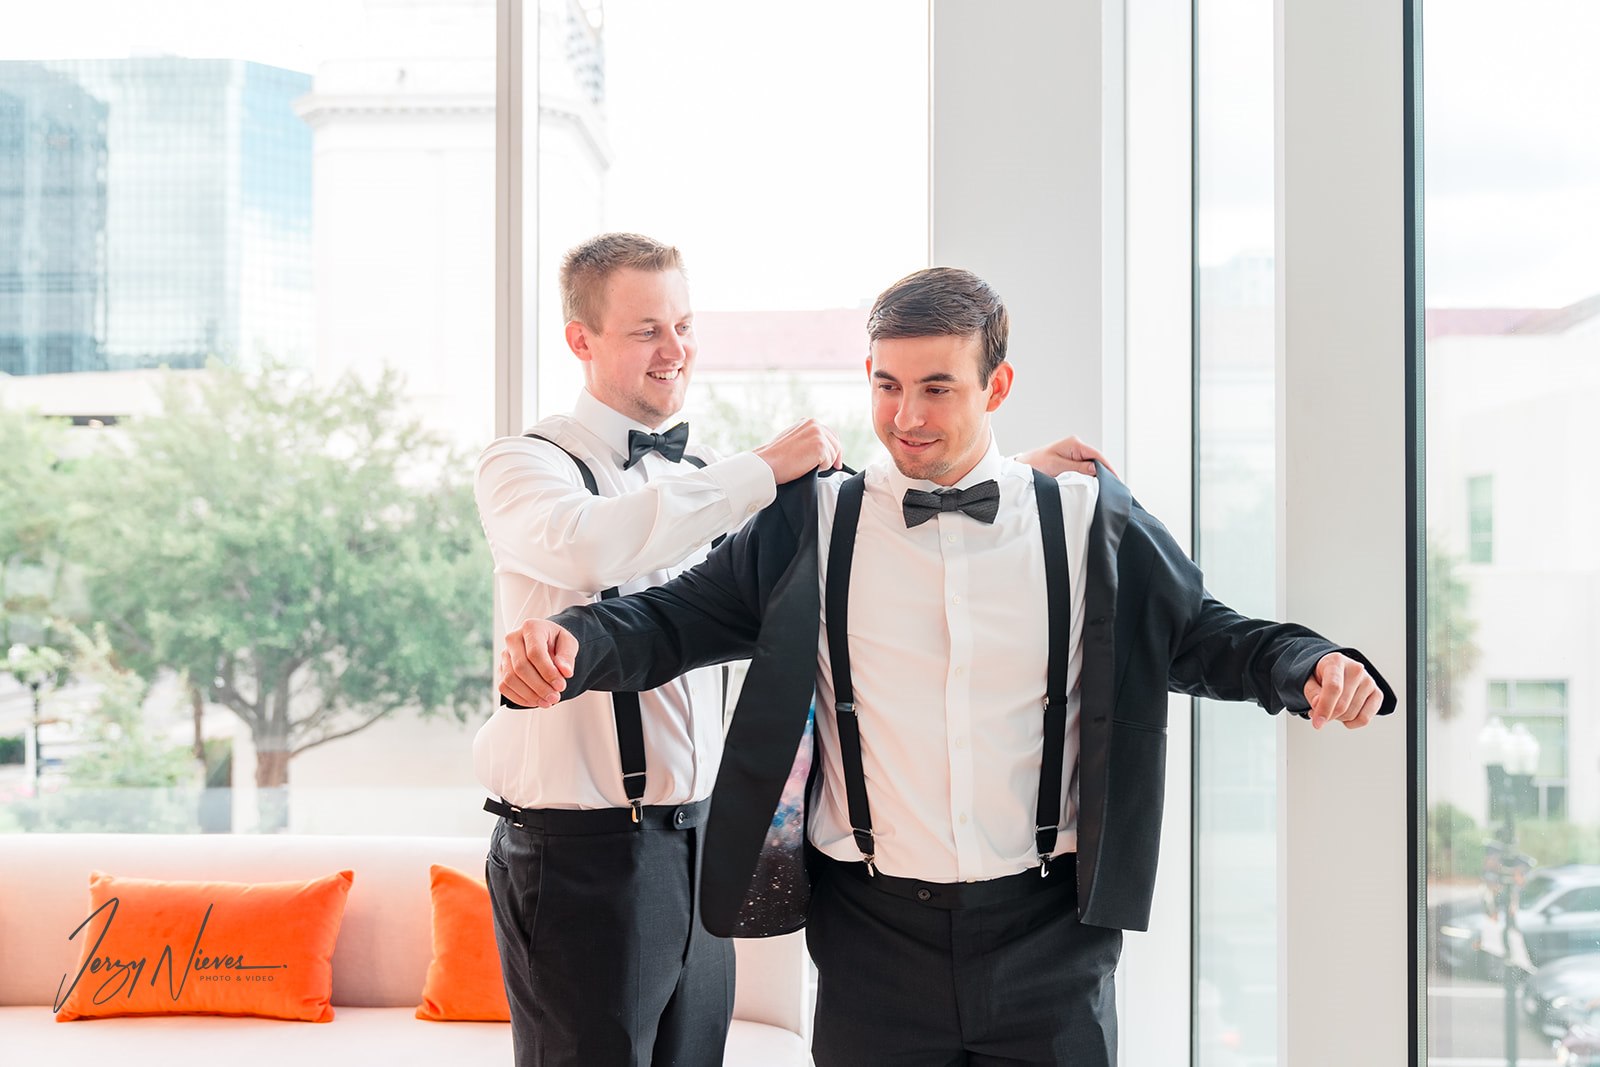 Best man helping the groom with his sports jacket pre-wedding.